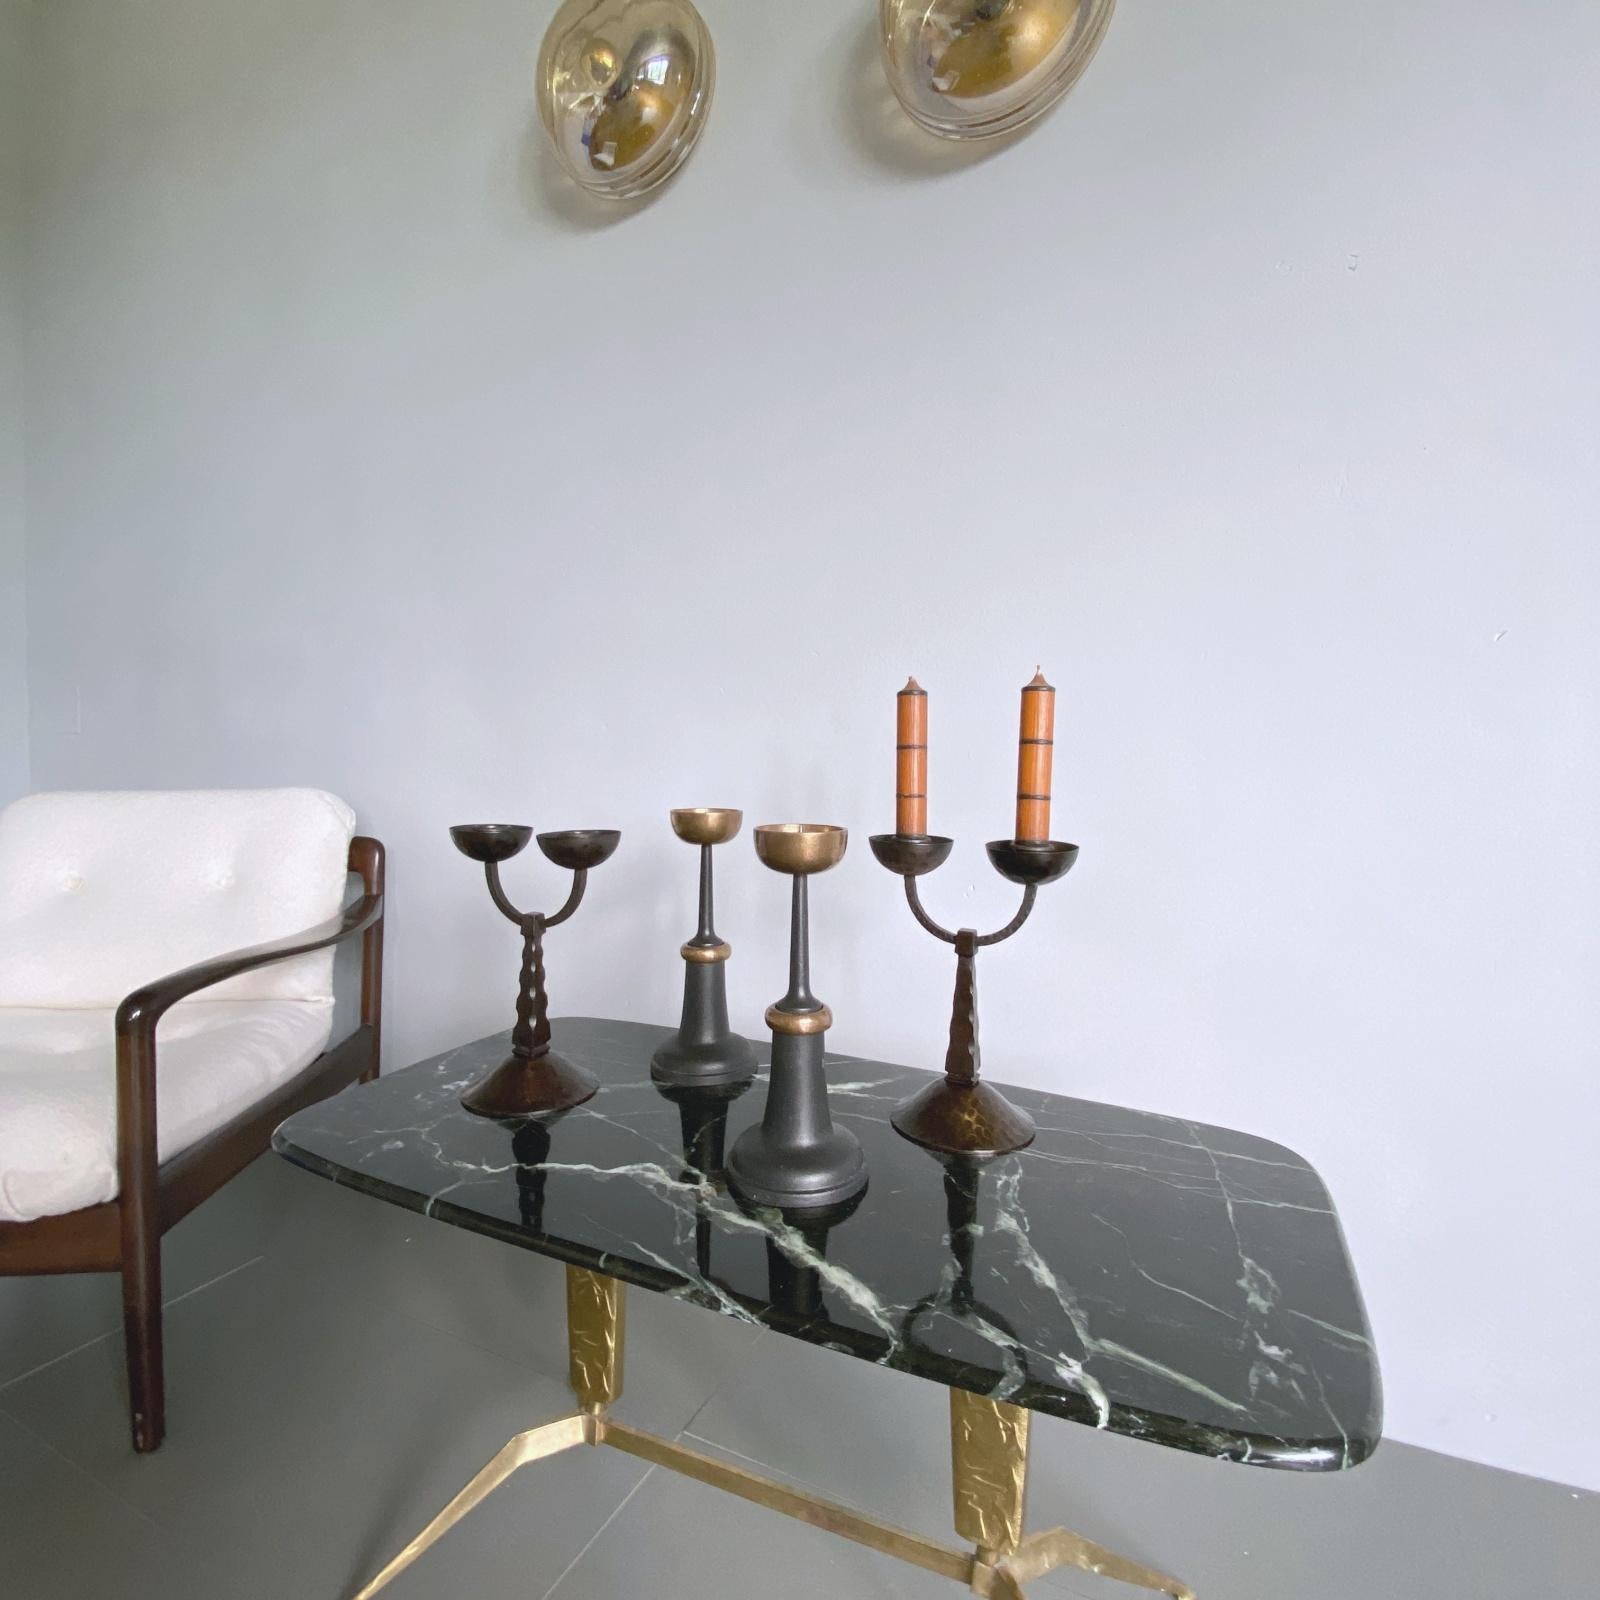 Pair of Midcentury Modern Forged Wrought Iron Candleholder, 1950s, Austria 1